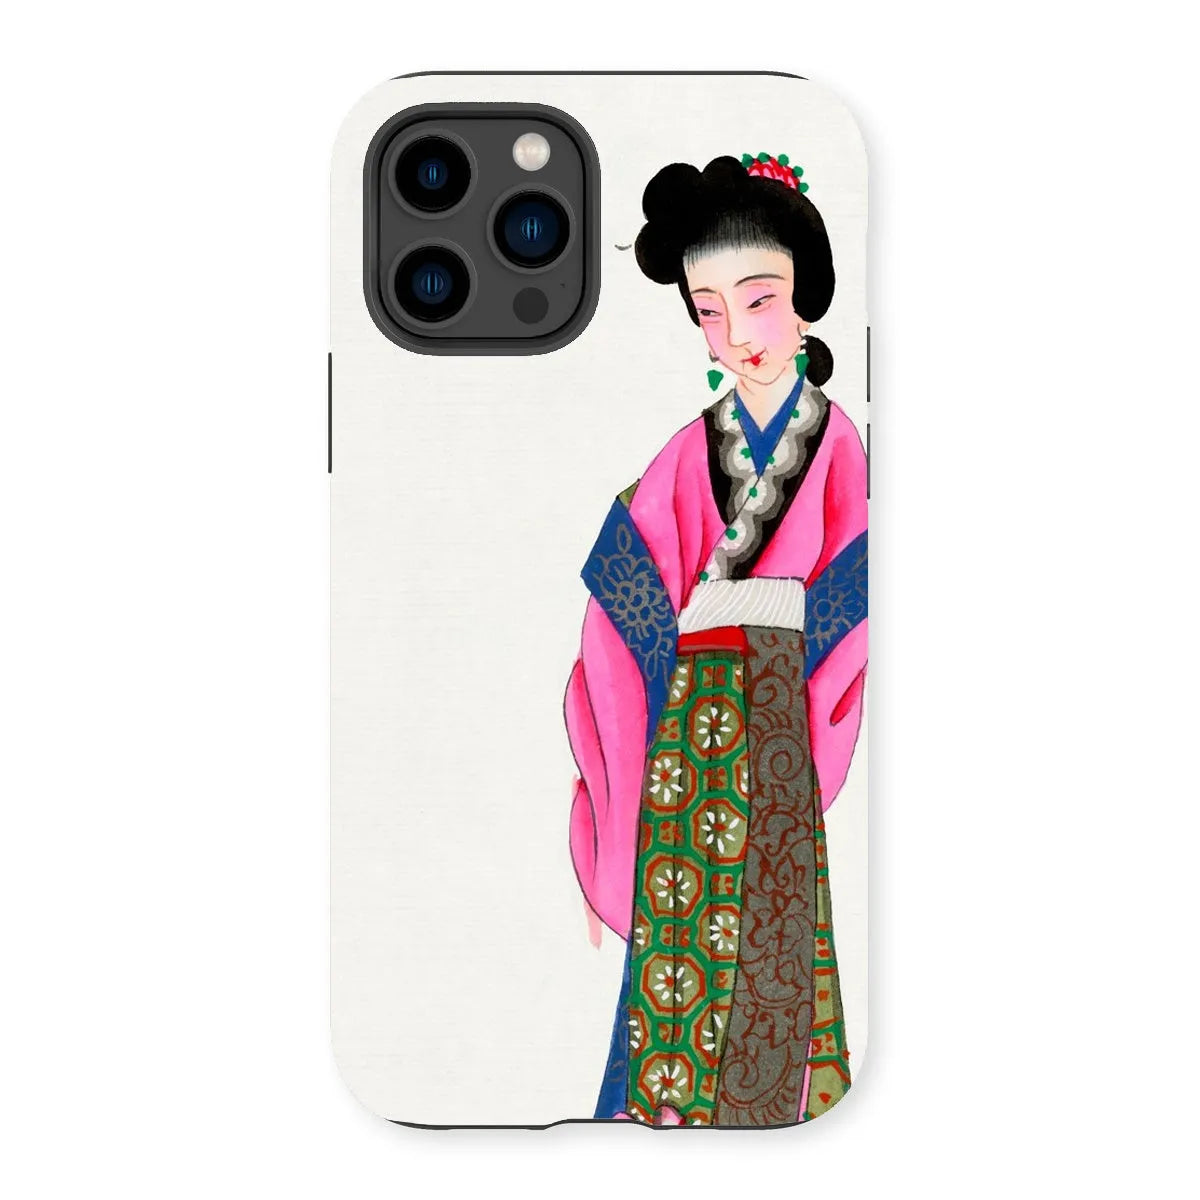 Noblewoman - Chinese Aesthetic Manchu Art Phone Case - Iphone 14 Pro / Matte - Mobile Phone Cases - Aesthetic Art